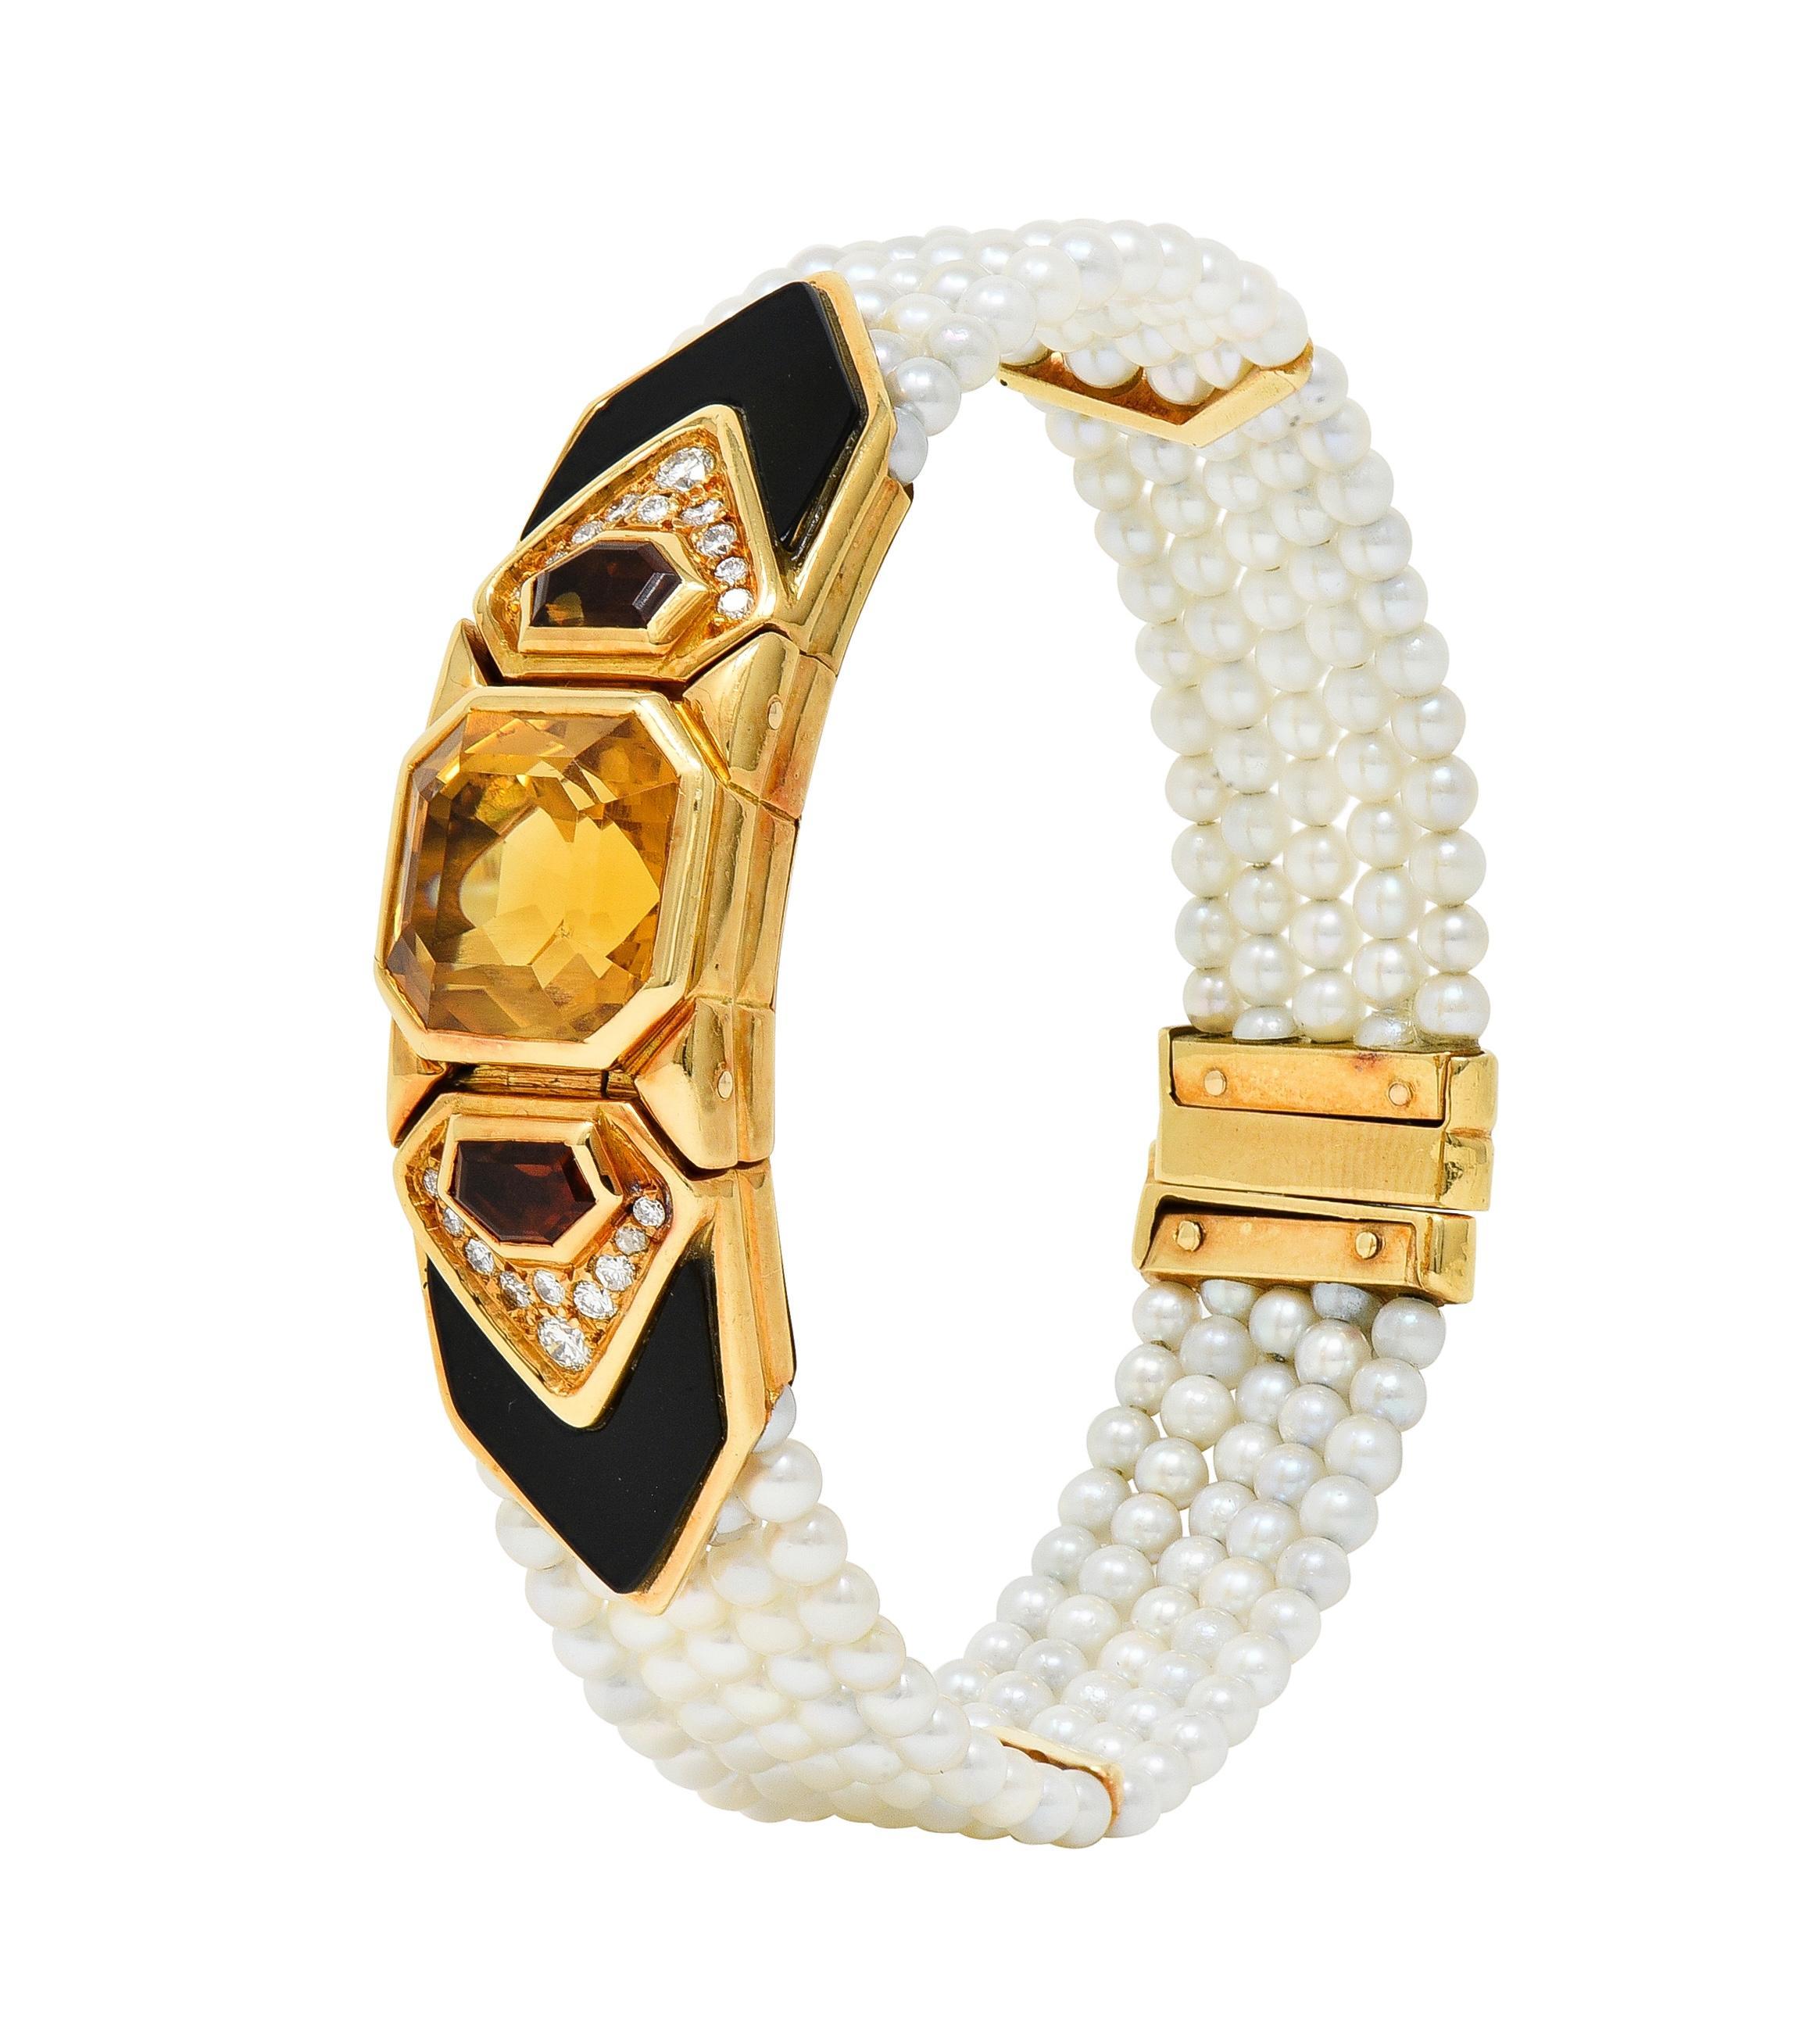 Designed as a multi-strand bracelet with a geometric central station featuring an emerald cut citrine 
Weighing approximately 15.73 carats - transparent medium brownish orange 
Flanked by additional shield cut citrines - each bezel set in gold